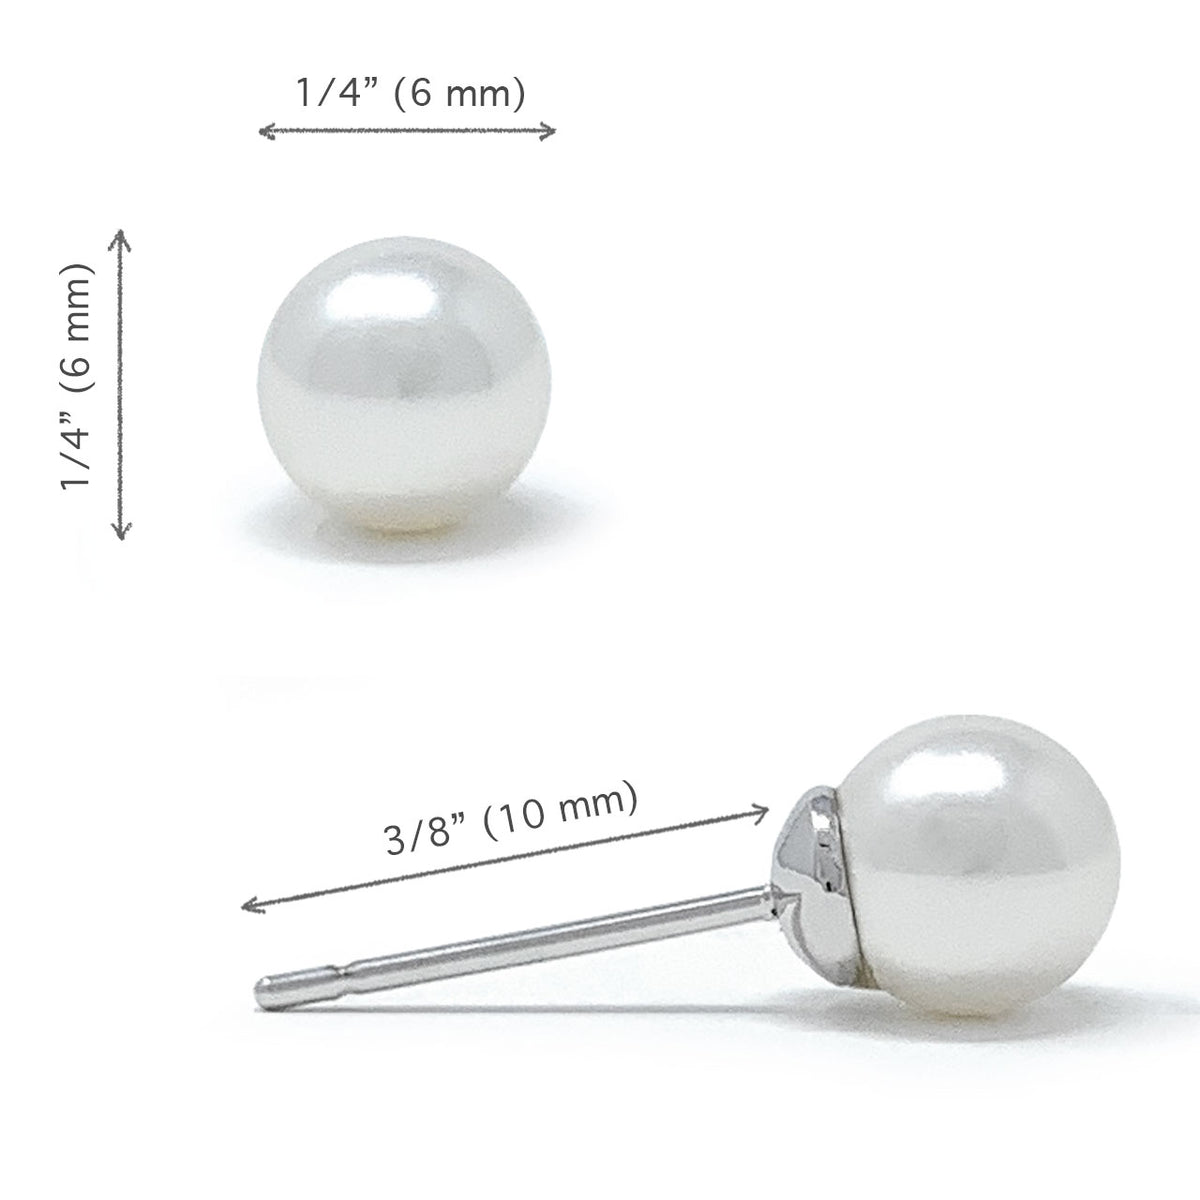 Elizabeth Small Stud Earrings with Ivory White Round Pearls from Swarovski Silver Toned Rhodium Plated - Ed Heart